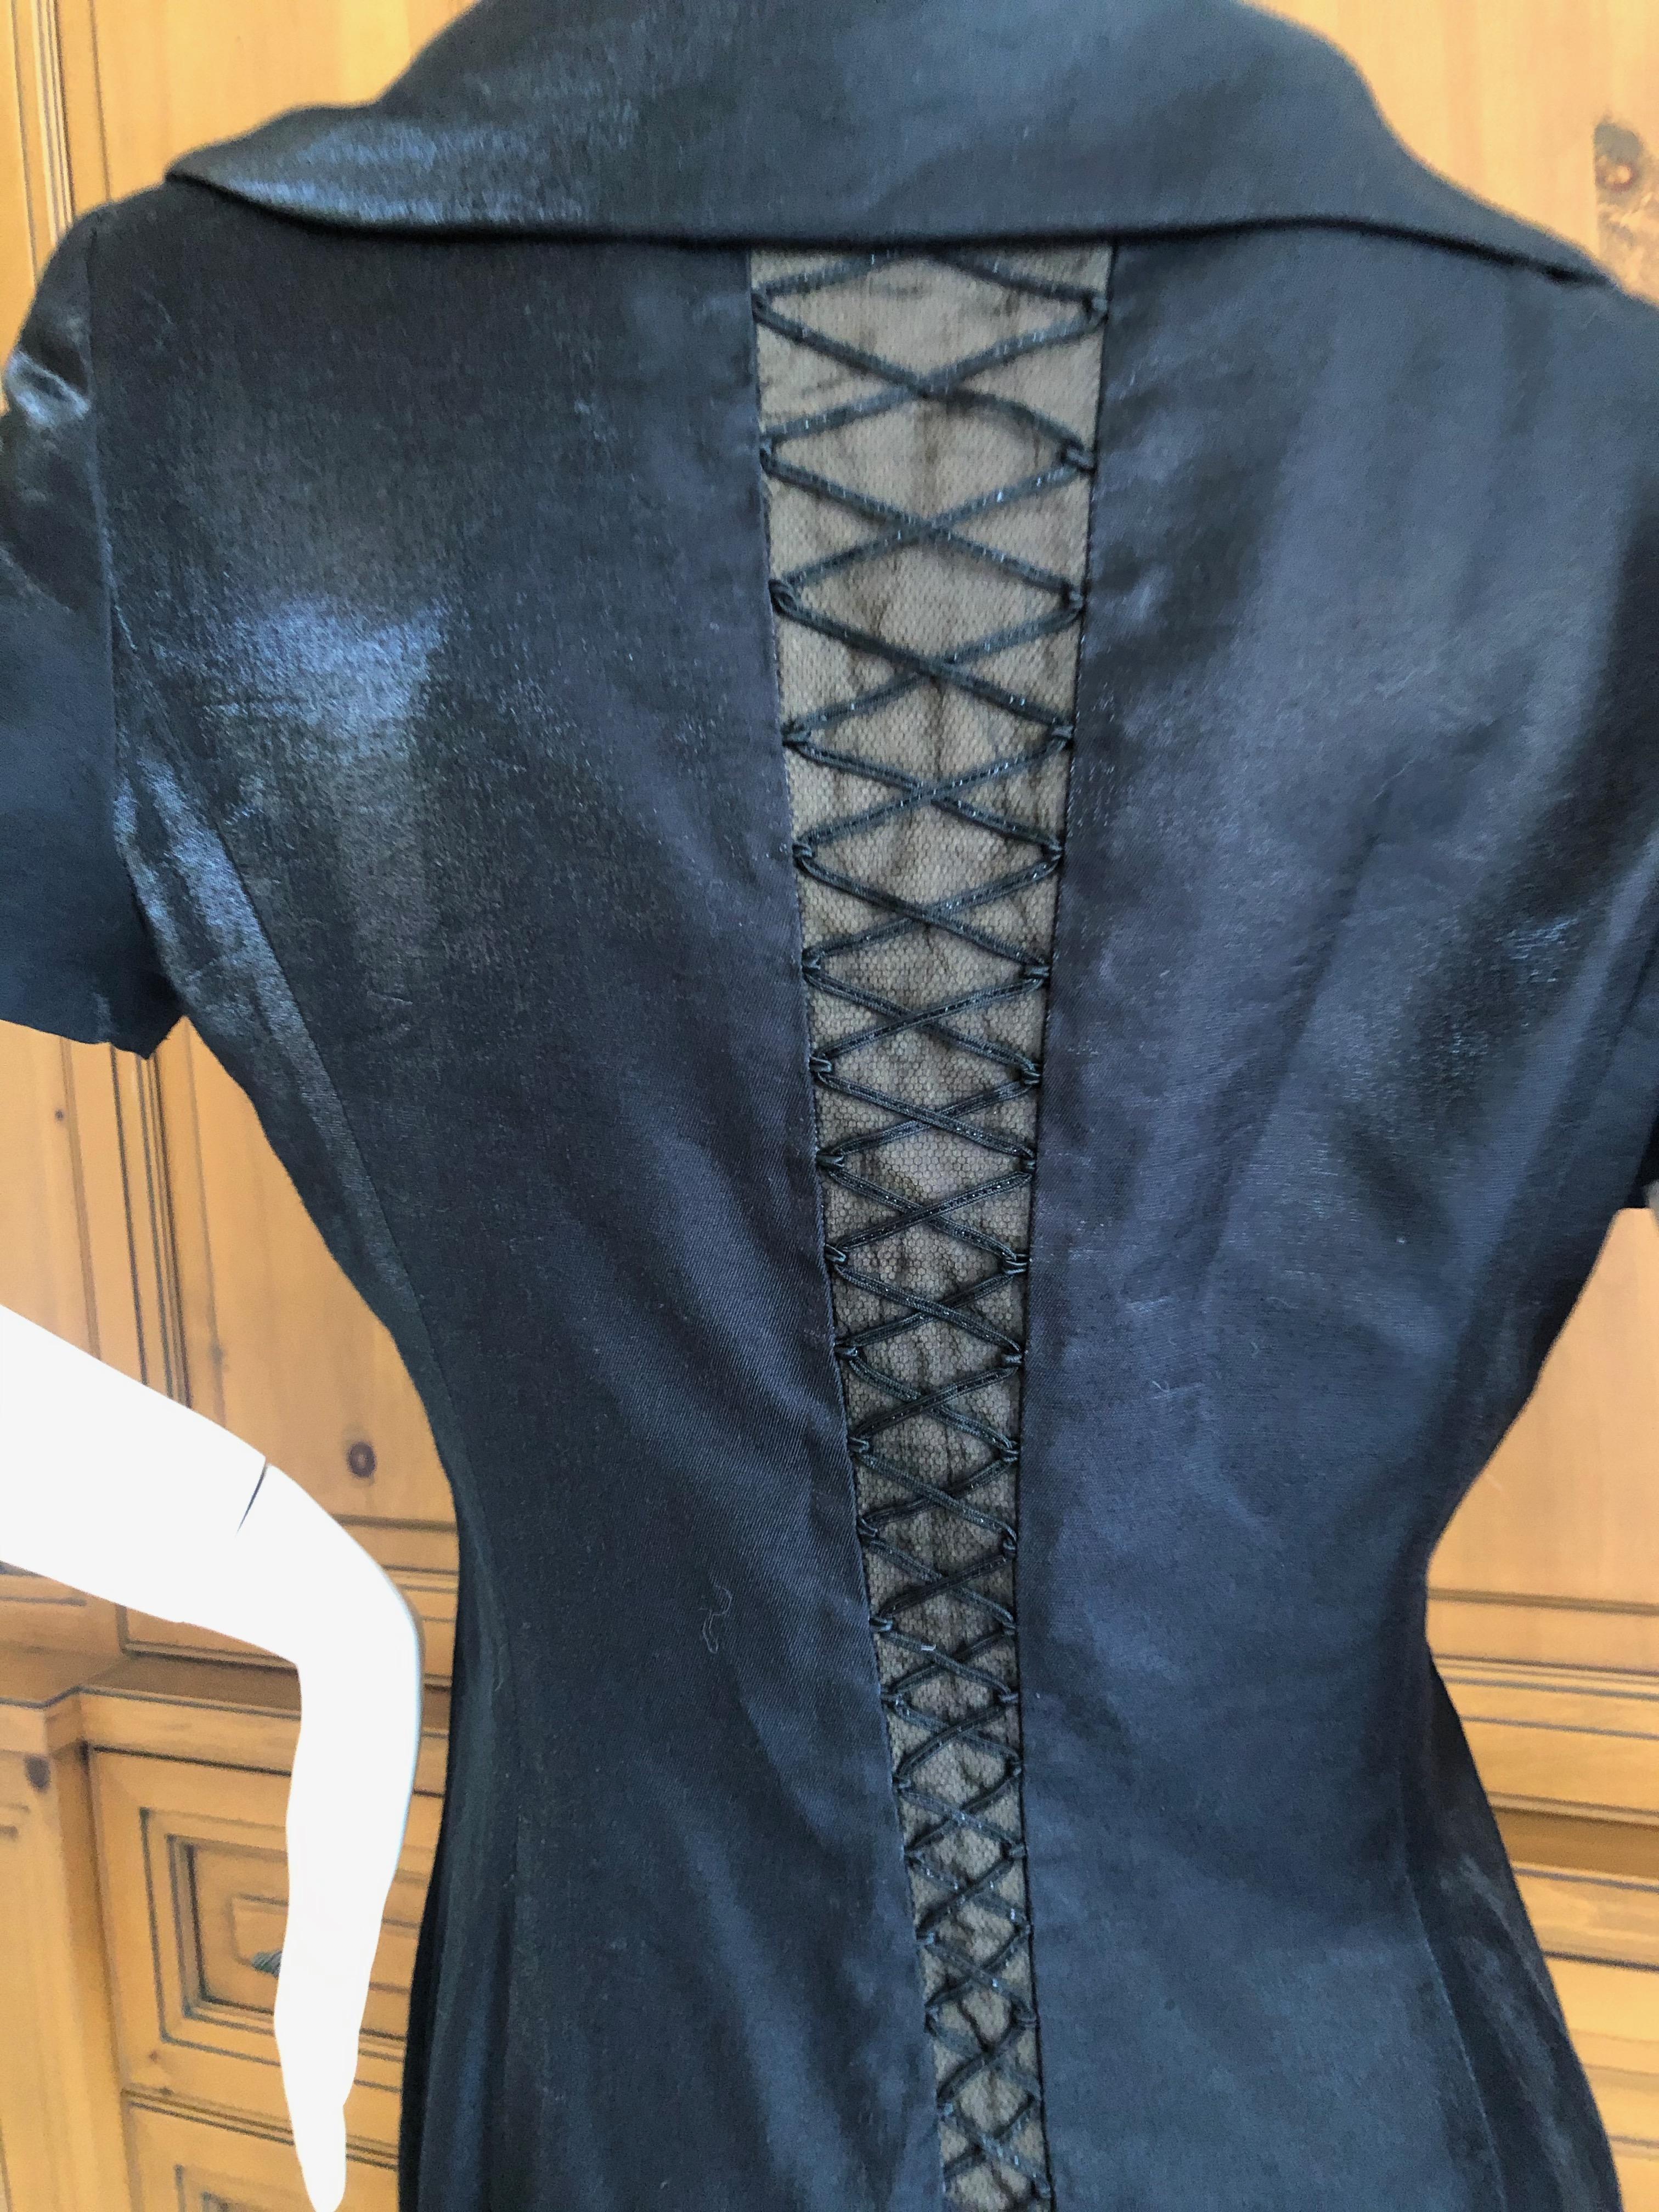 Black Christian Dior 1992 Numbered Demi Couture Corset Laced Dress by Gianfranco Ferre For Sale